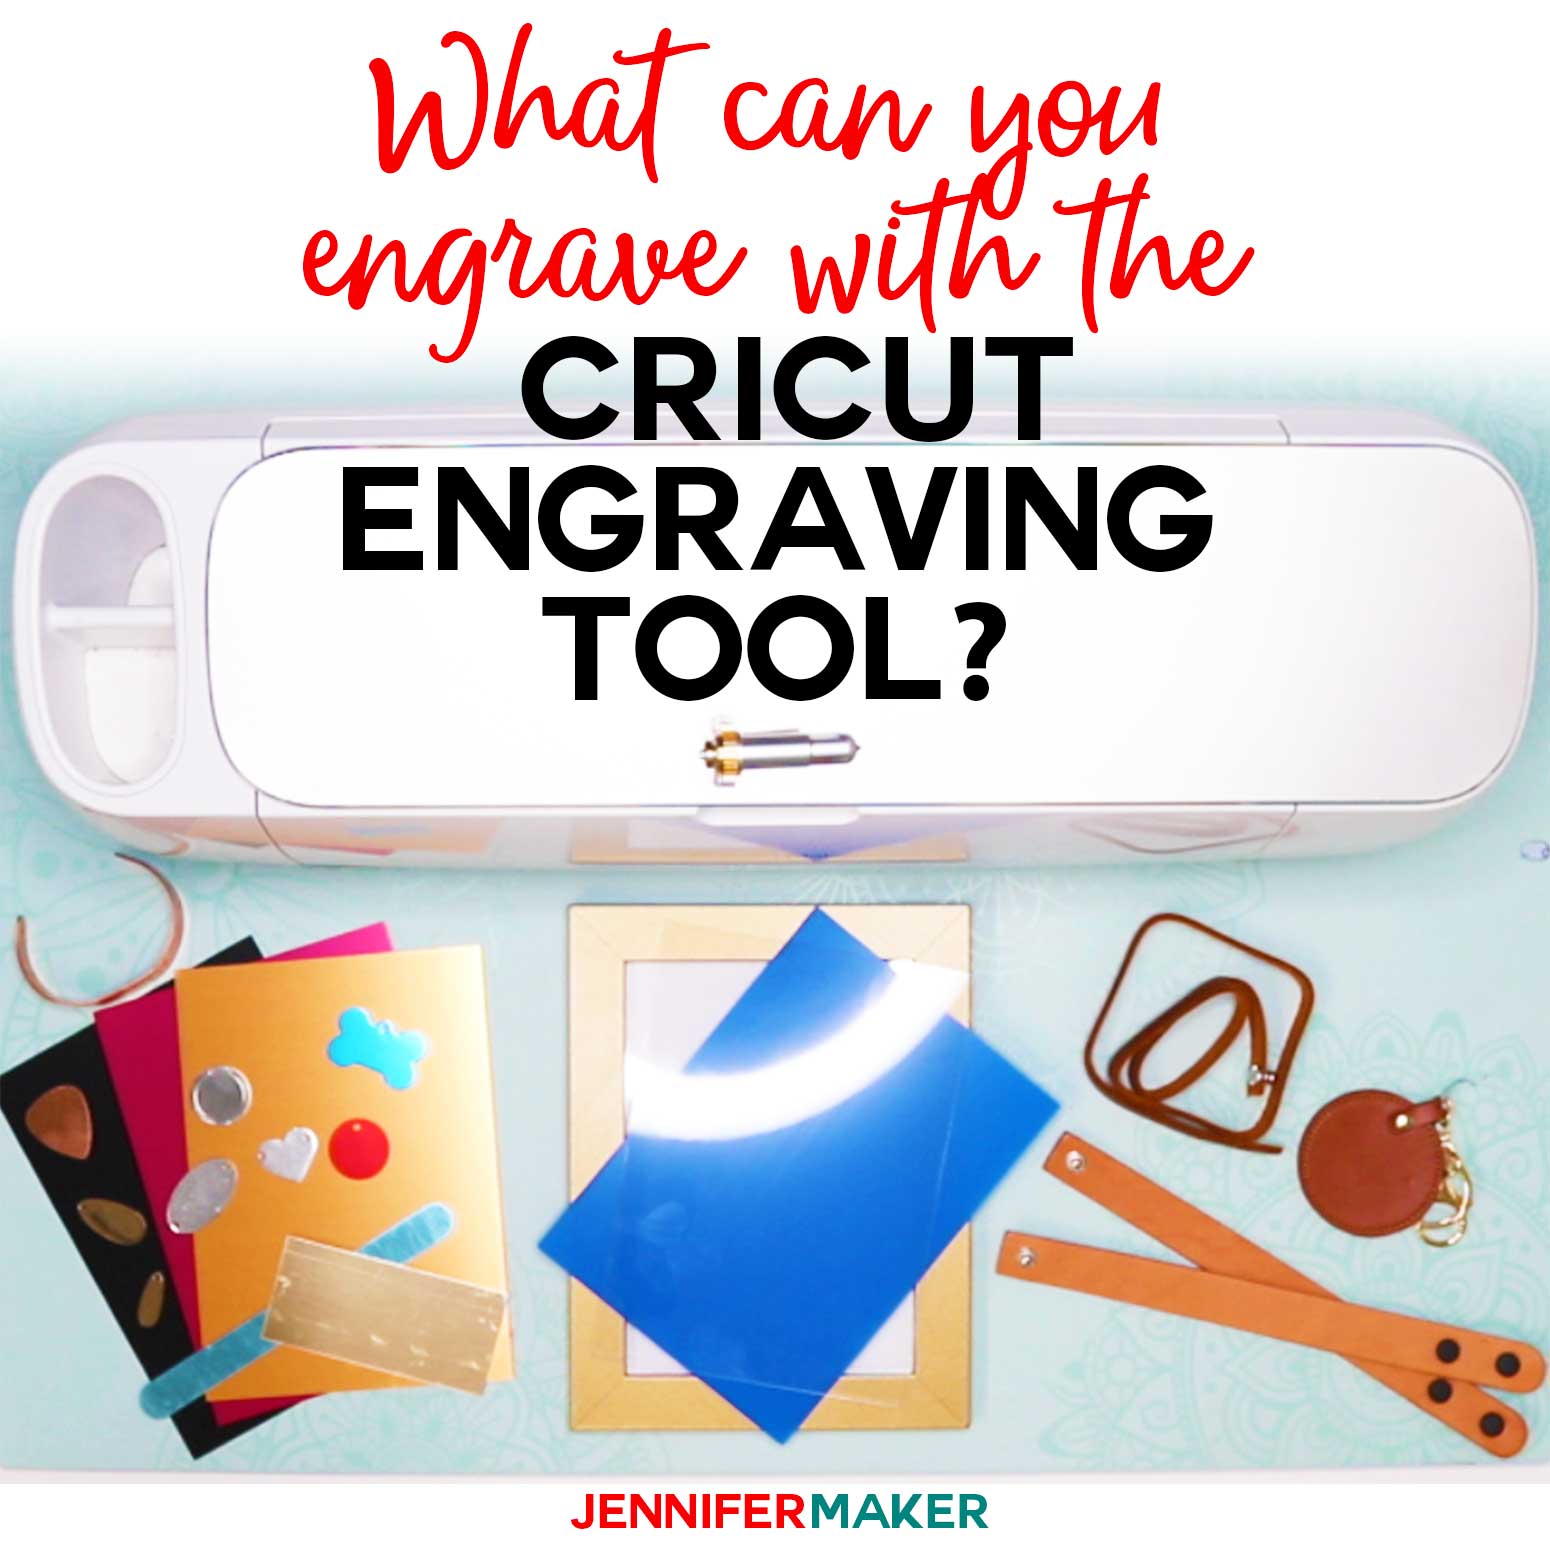 Cricut Maker Engraving Tool Materials: What Can You Engrave with Your Cricut? #cricut #engraving #cricutmaker